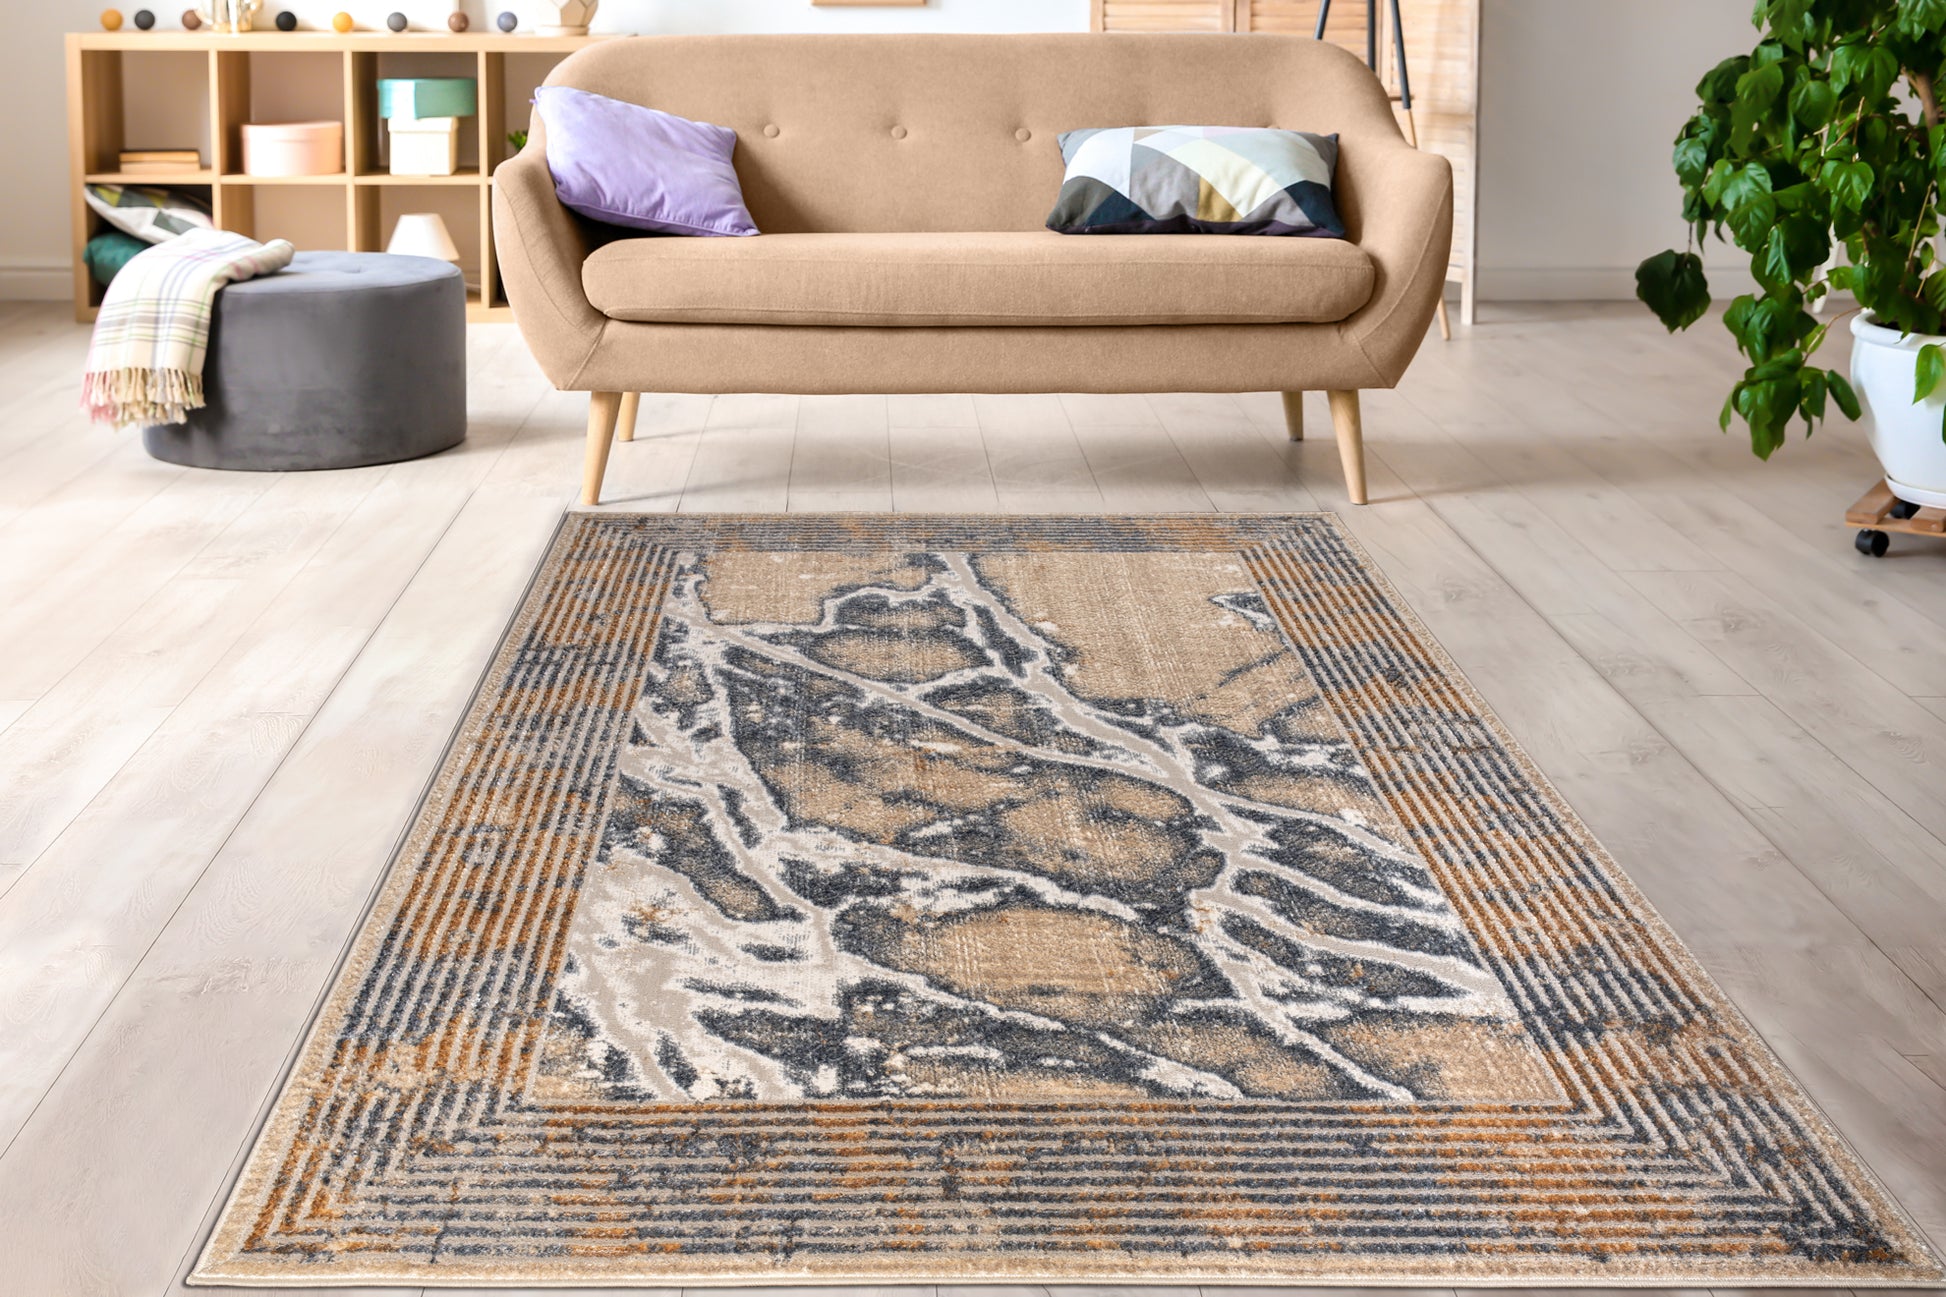 beige brown grey metalic abstract modern contemporary marble pattern bordered area rug 4x6, 4x5 ft Small Carpet, Home Office, Living Room, Bedroom